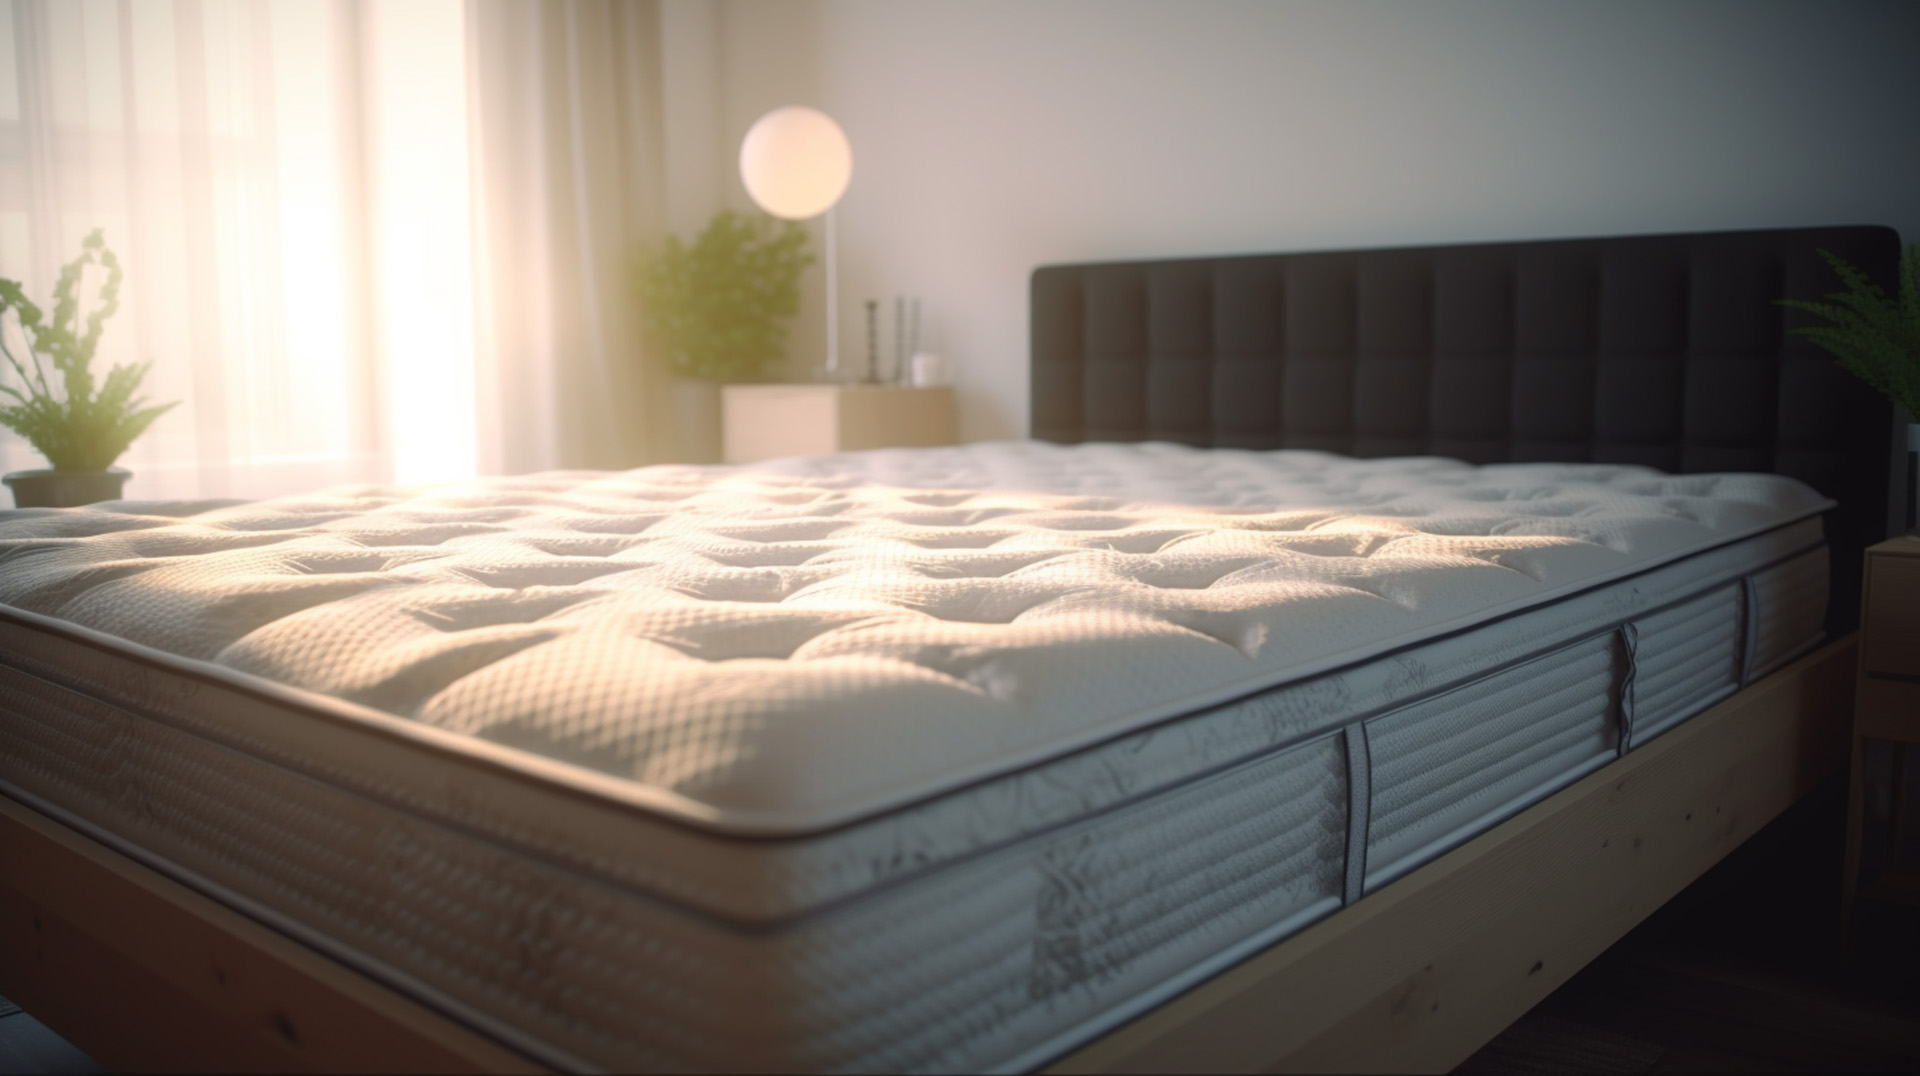 Shop Organic Mattresses and Beds in Oshkosh, WI